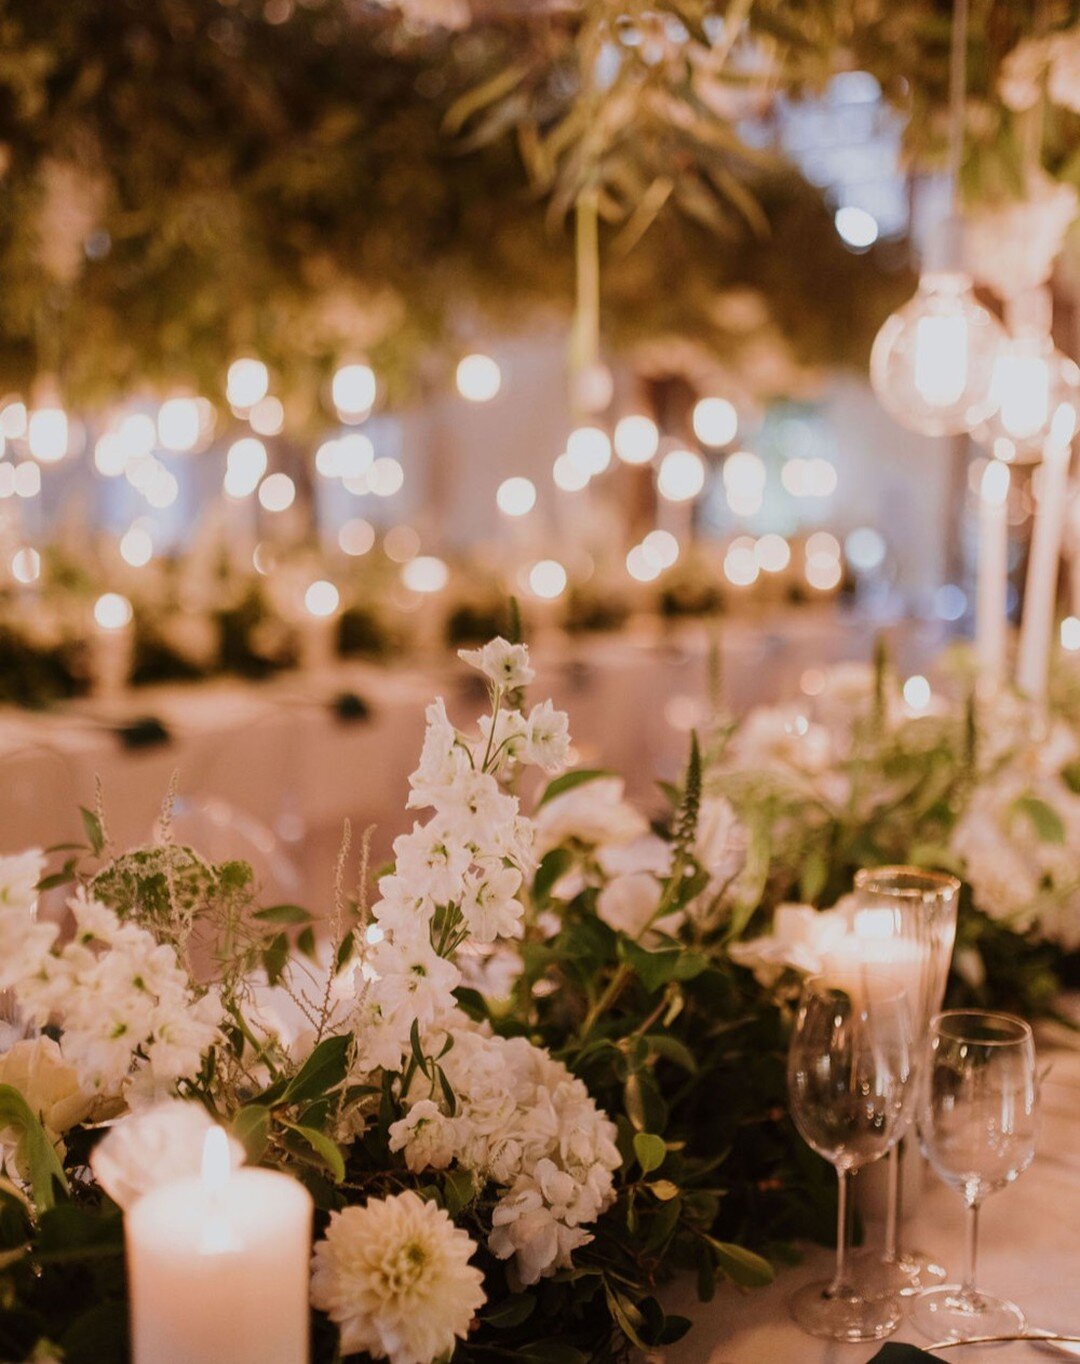 Amazing transformations turn our banqueting hall, manor house, gardens and stone chapel into your specialised wedding. Contact us to find out how we can help you to experience your fairytale wedding. #choosenooitgedacht 📸 @edo.photo.za @n.concepts.a